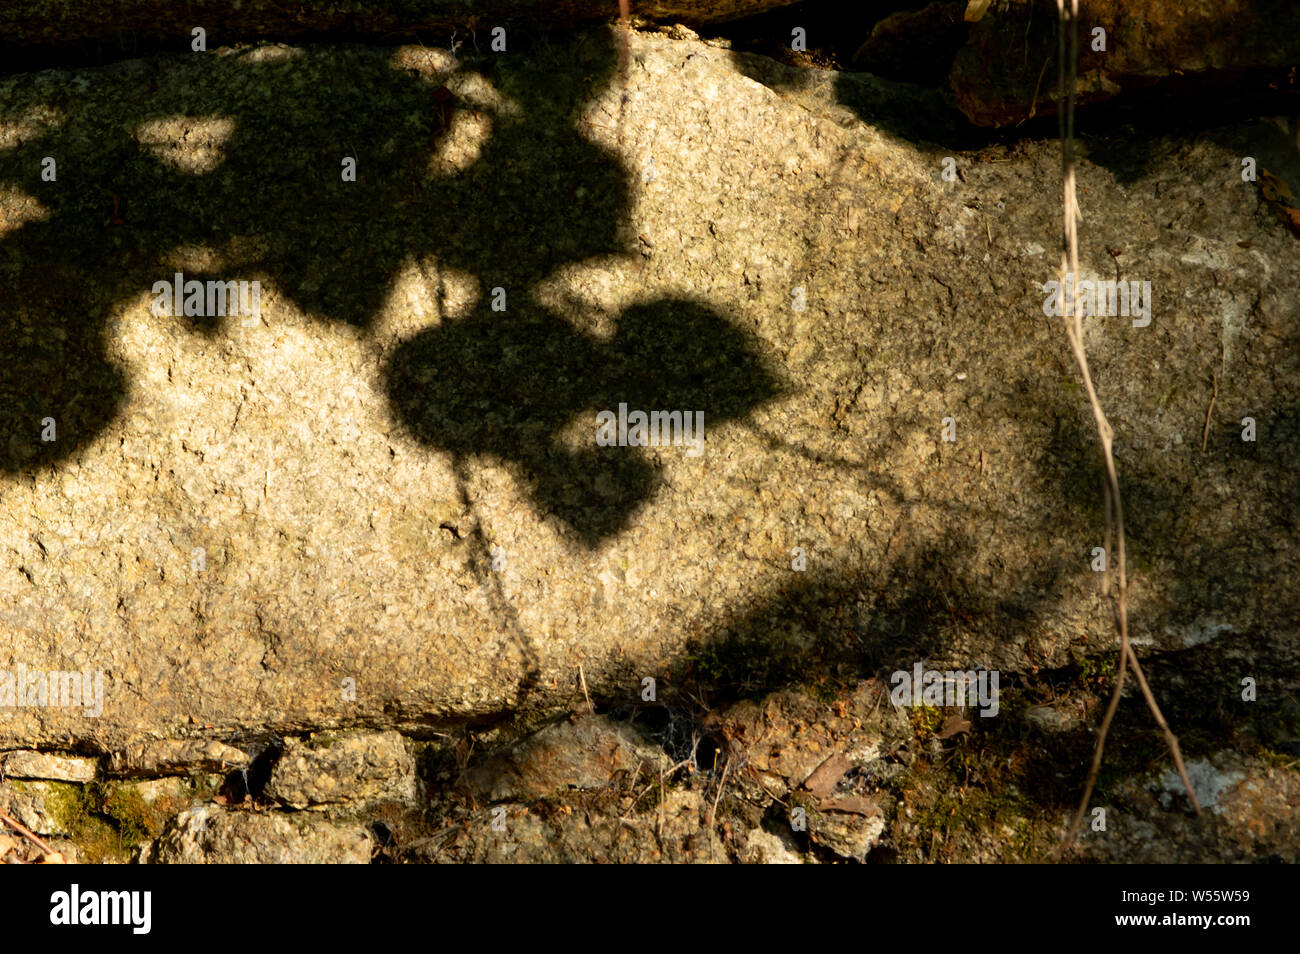 shadow of leaves on an old wall of irregular stones in warm morning sunlight Stock Photo